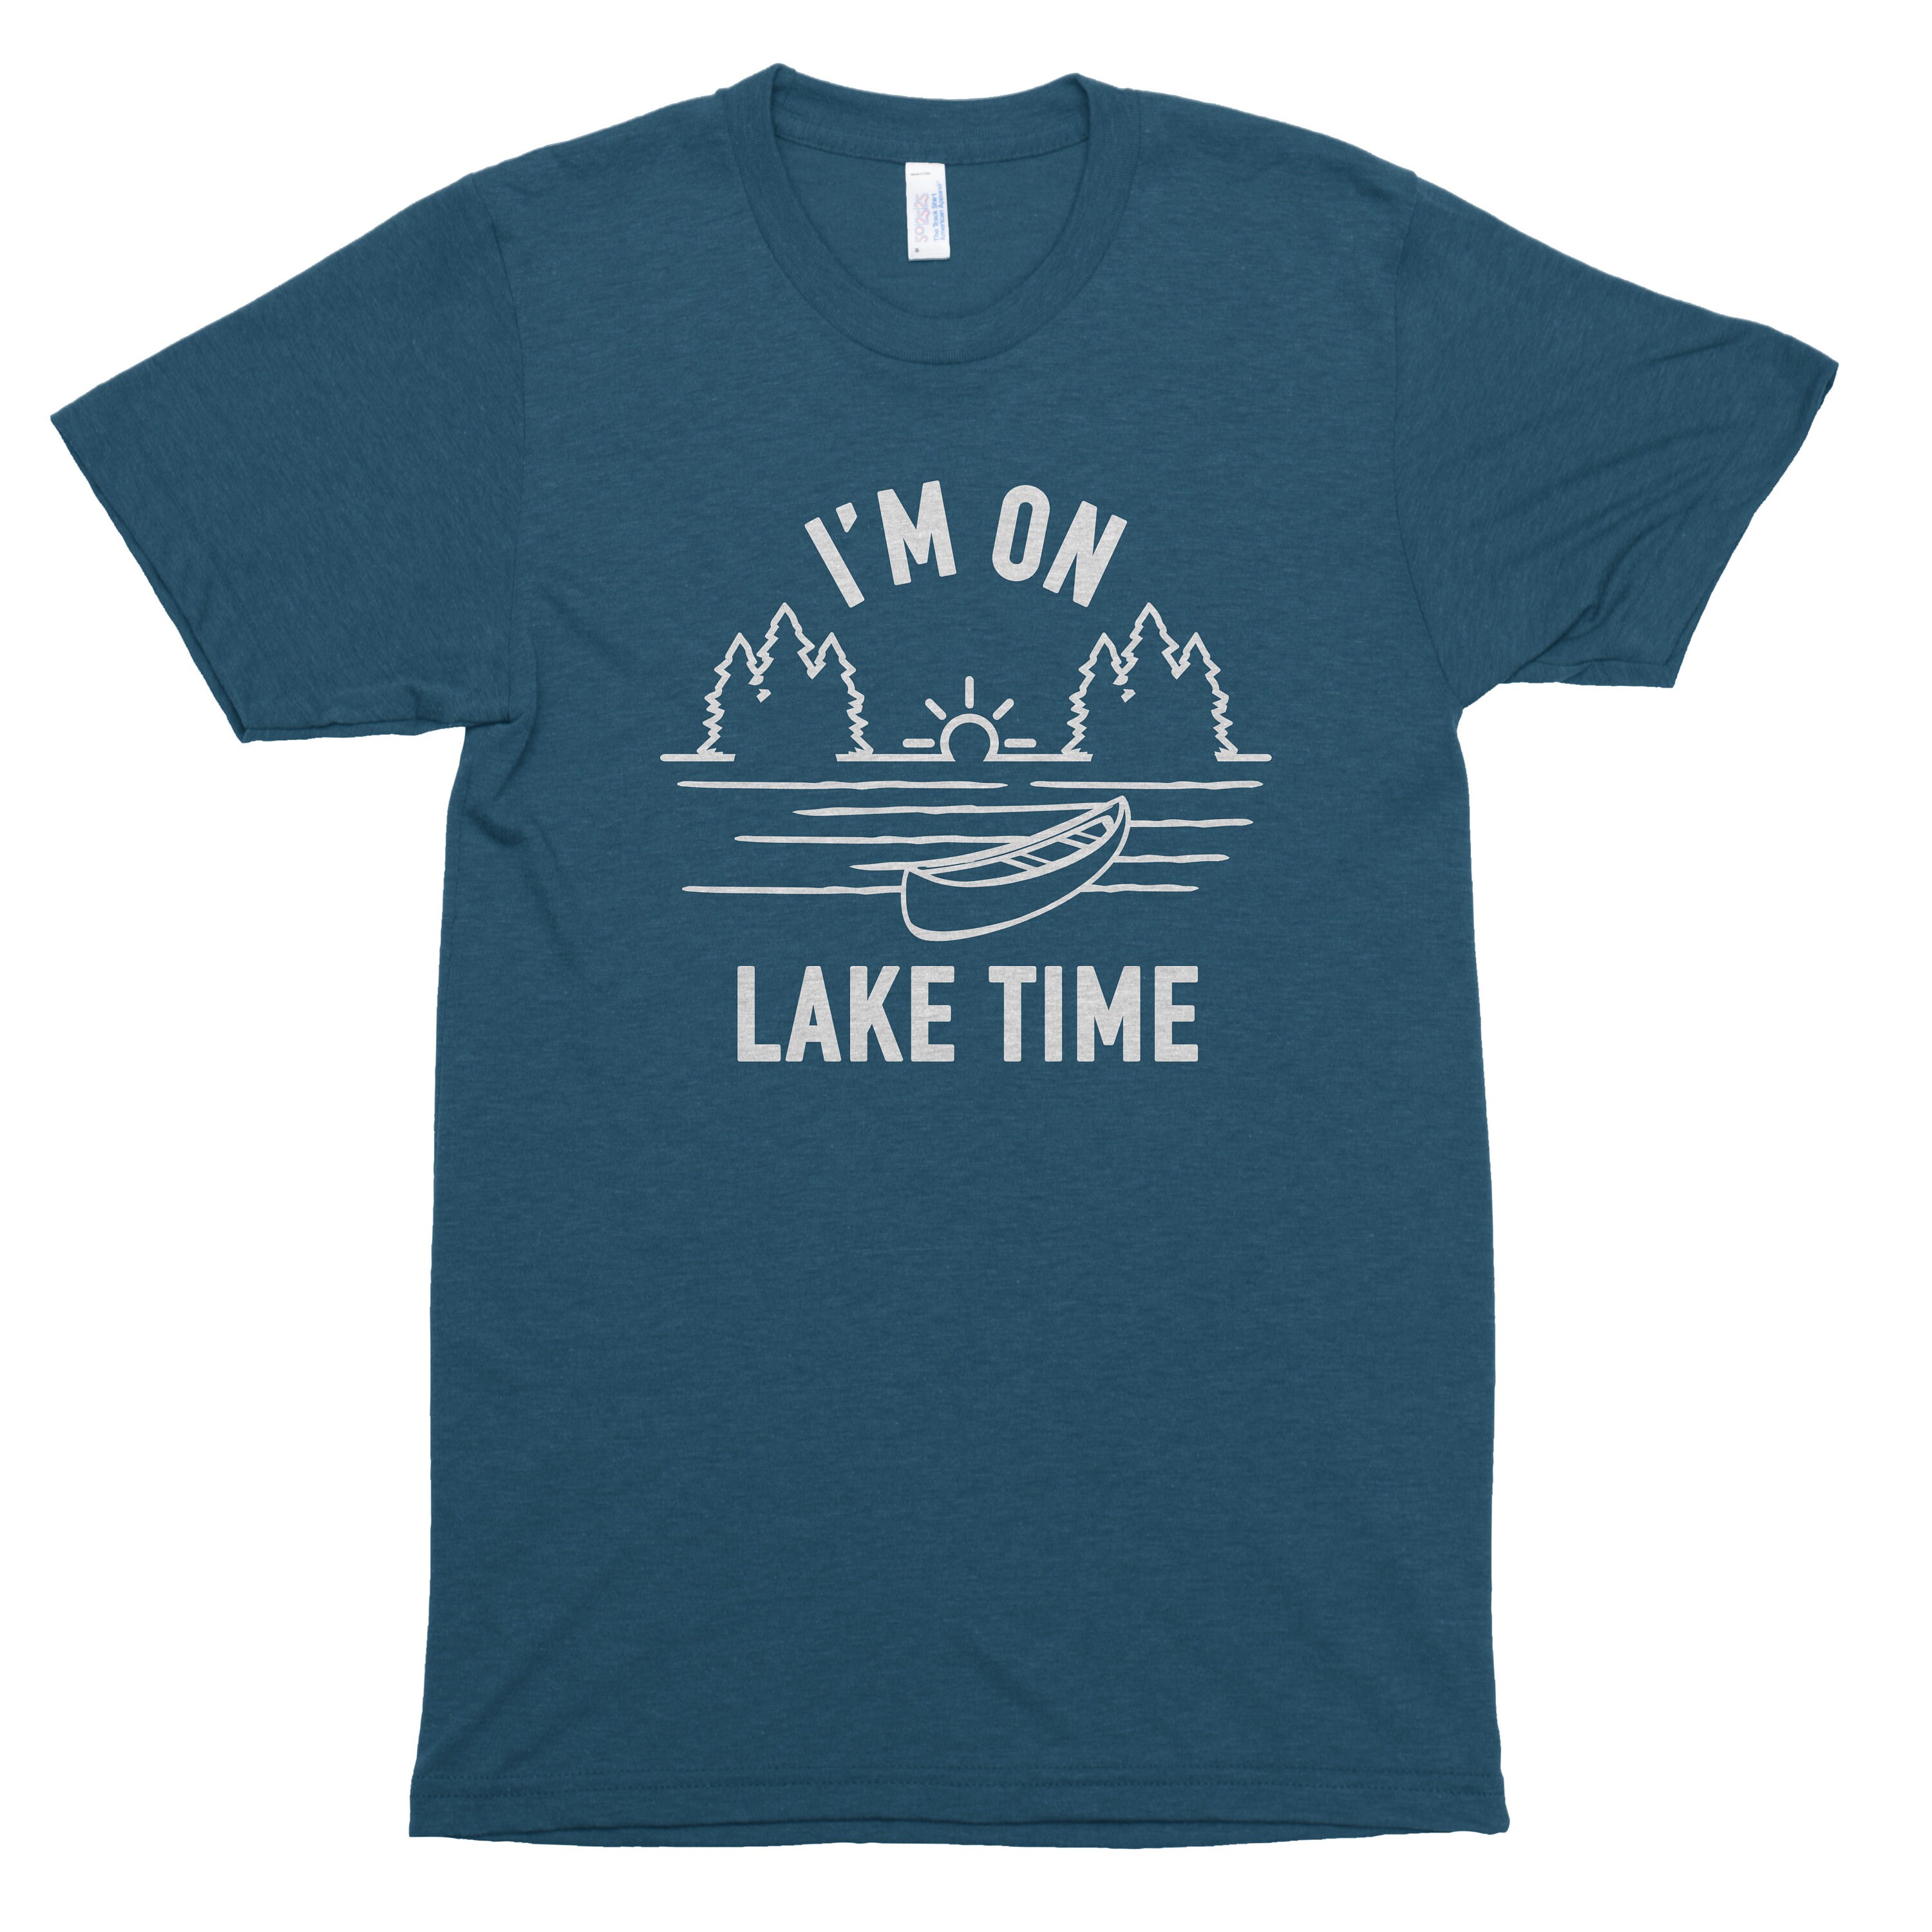 On　CHARACTER　】　【　Tシャツ　LICENSED　タイム　Tee　Time　Im　Lake　Green-